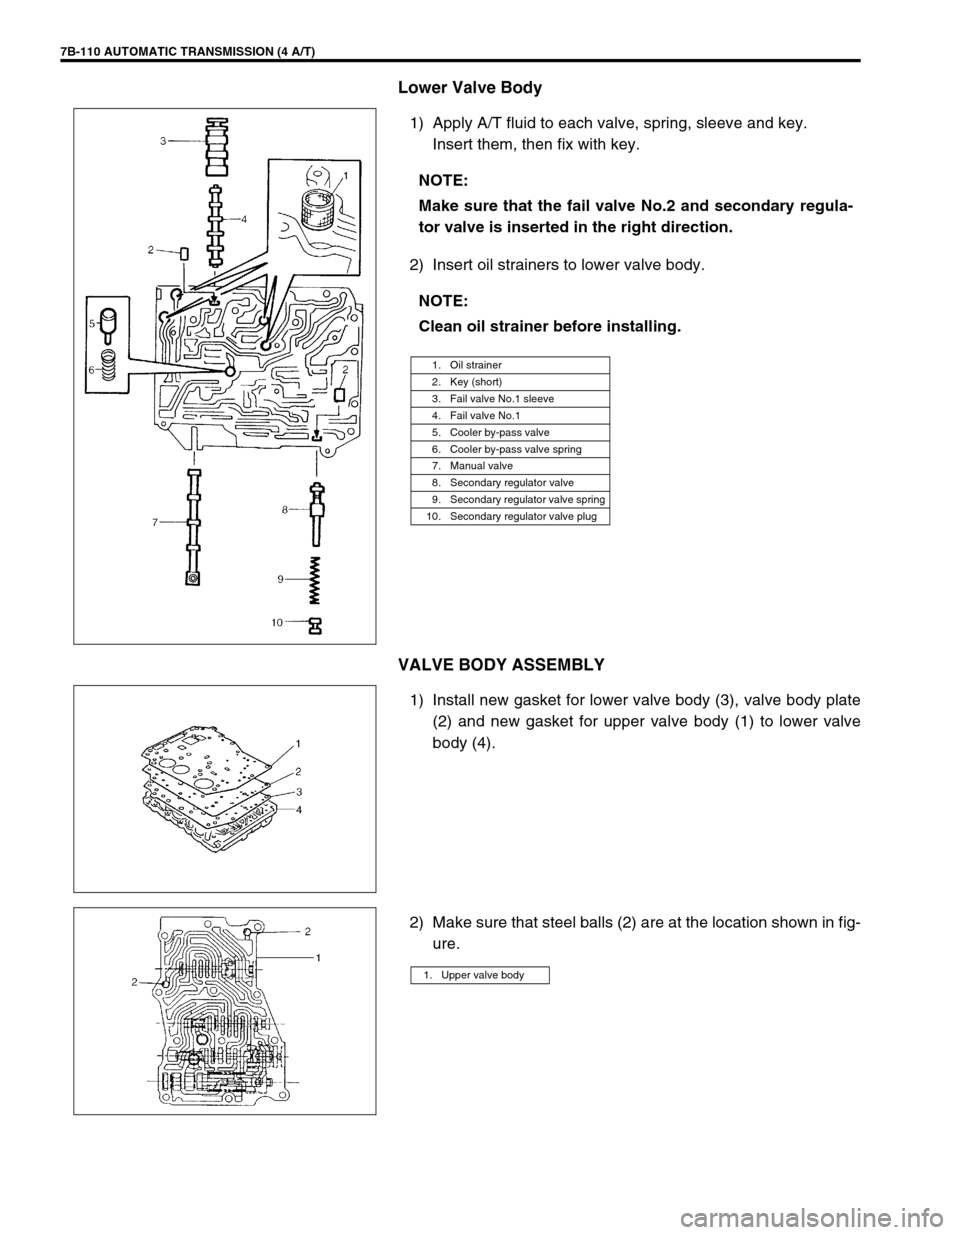 SUZUKI SWIFT 2000 1.G Transmission Service Workshop Manual 7B-110 AUTOMATIC TRANSMISSION (4 A/T)
Lower Valve Body
1) Apply A/T fluid to each valve, spring, sleeve and key.
Insert them, then fix with key.
2) Insert oil strainers to lower valve body.
VALVE BODY